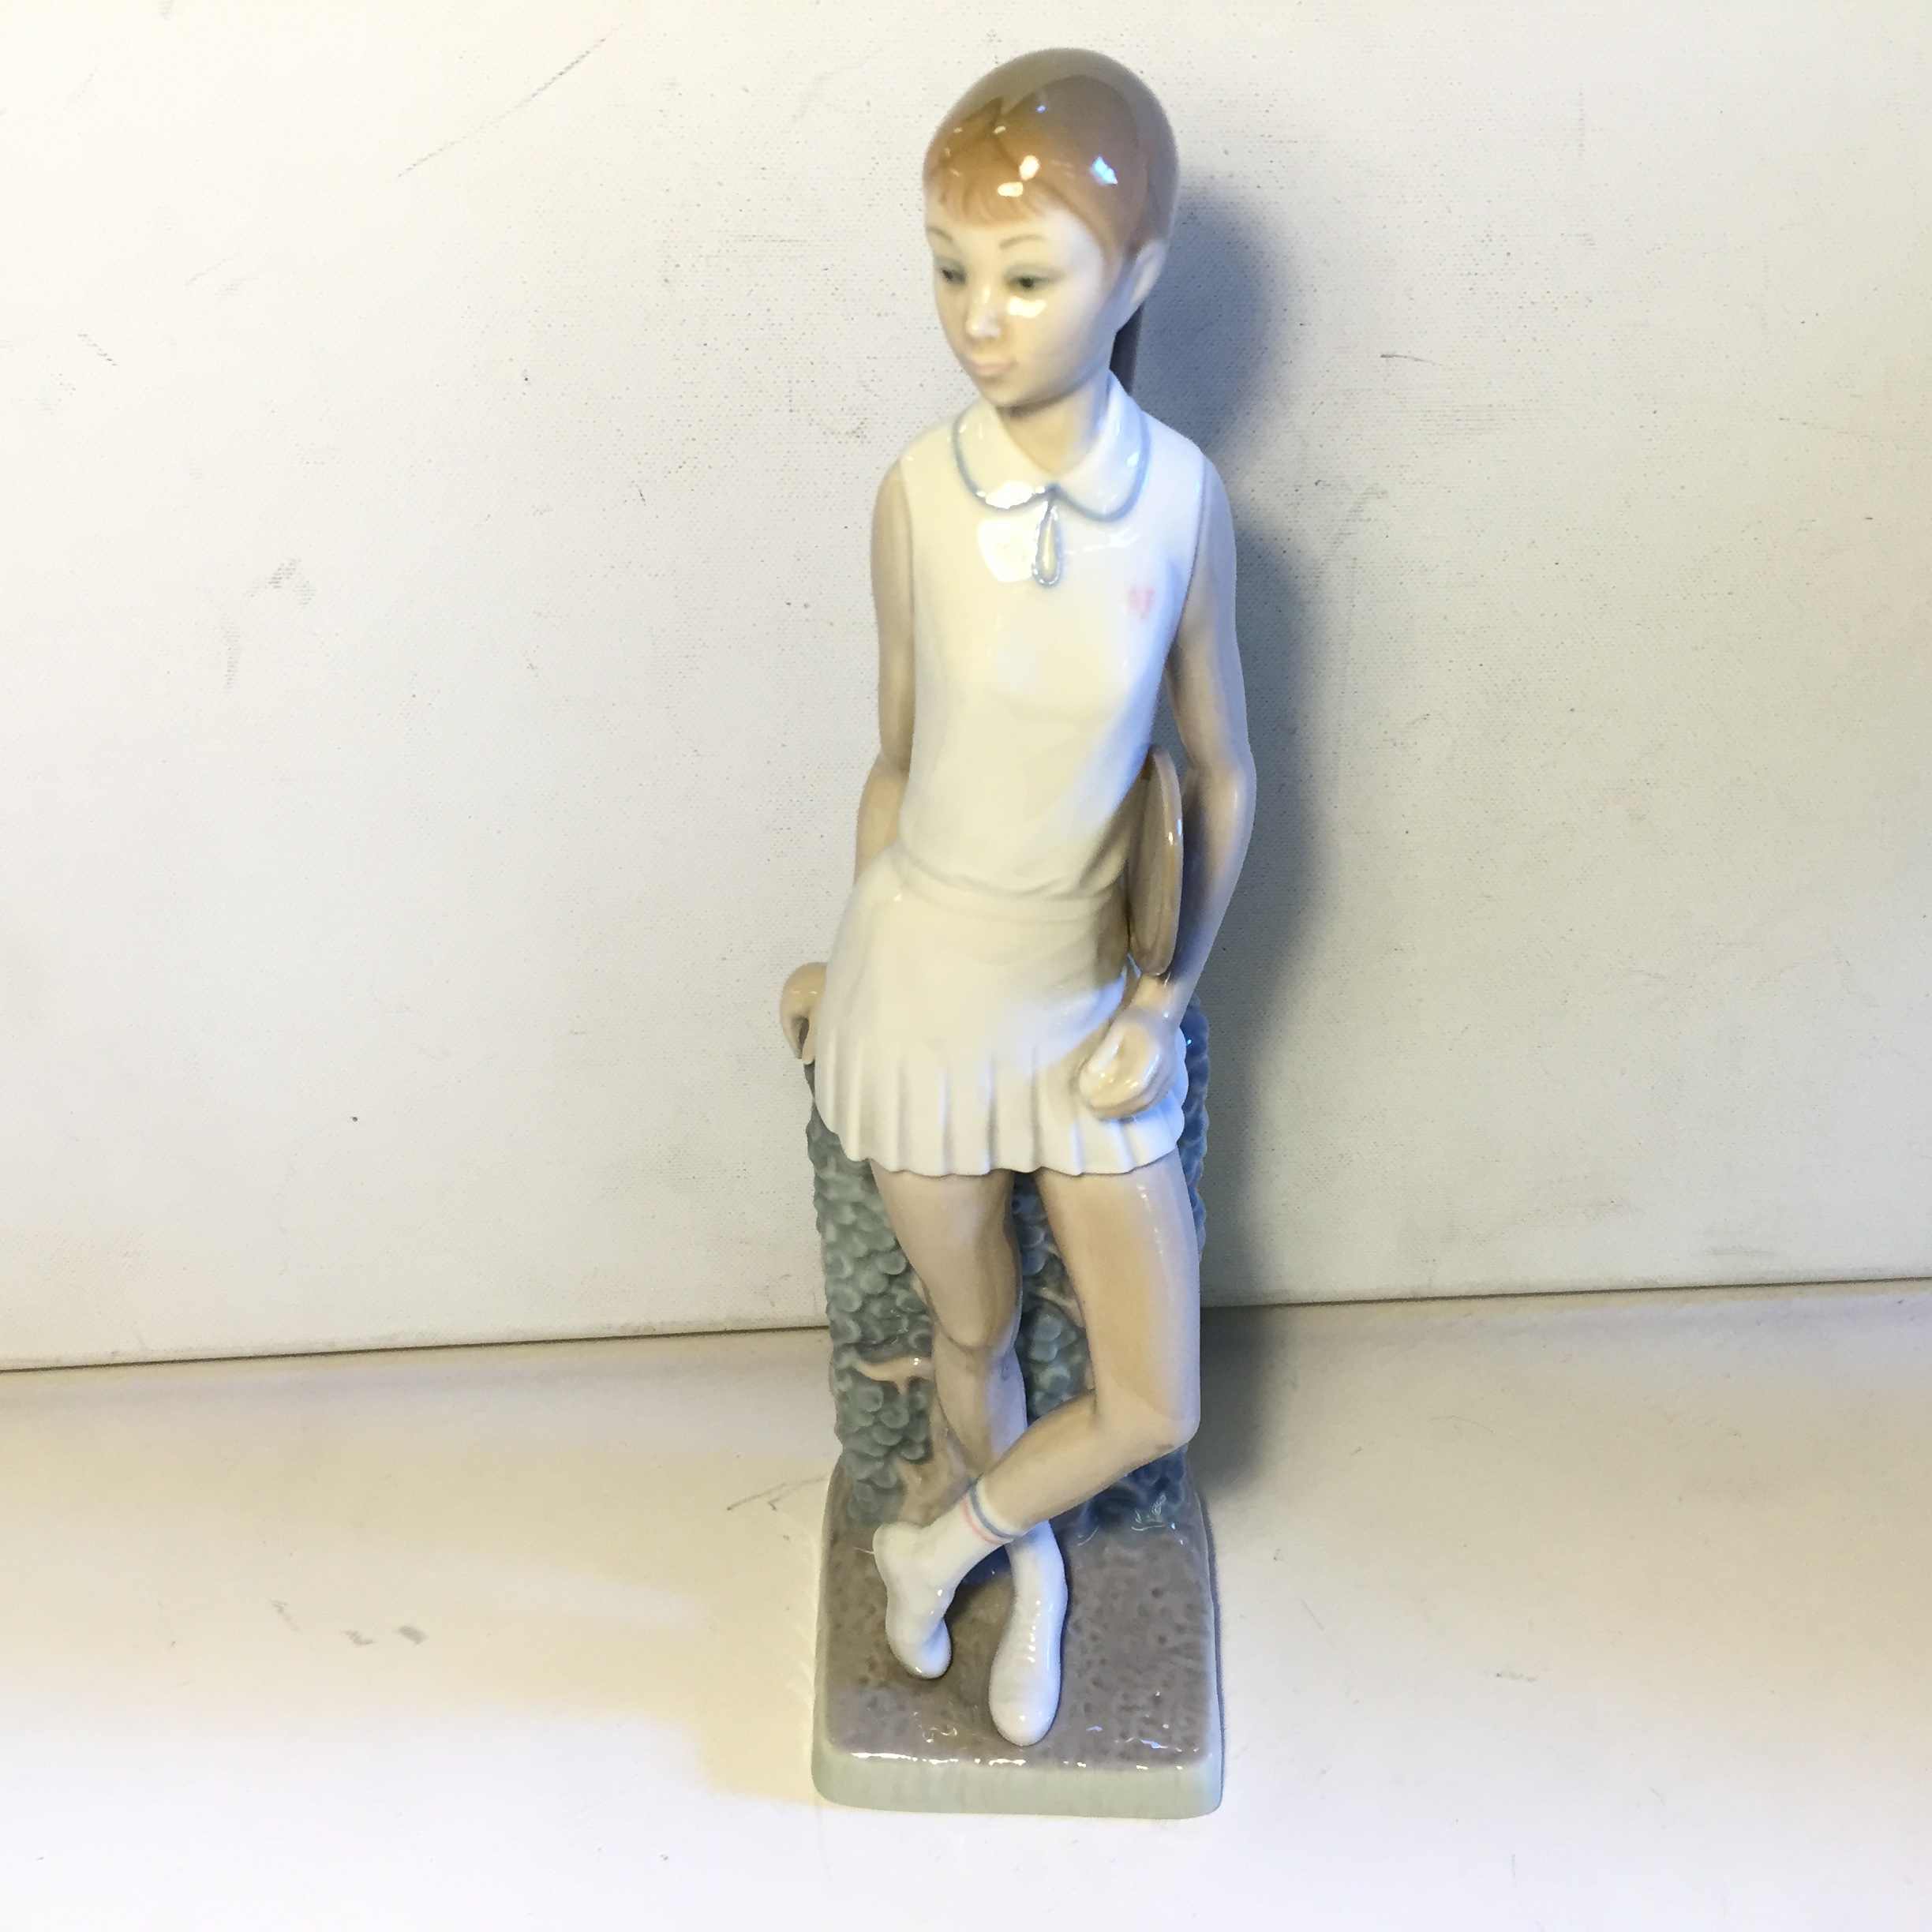 A Lladro figurine of a girl playing in a tennis outfit.